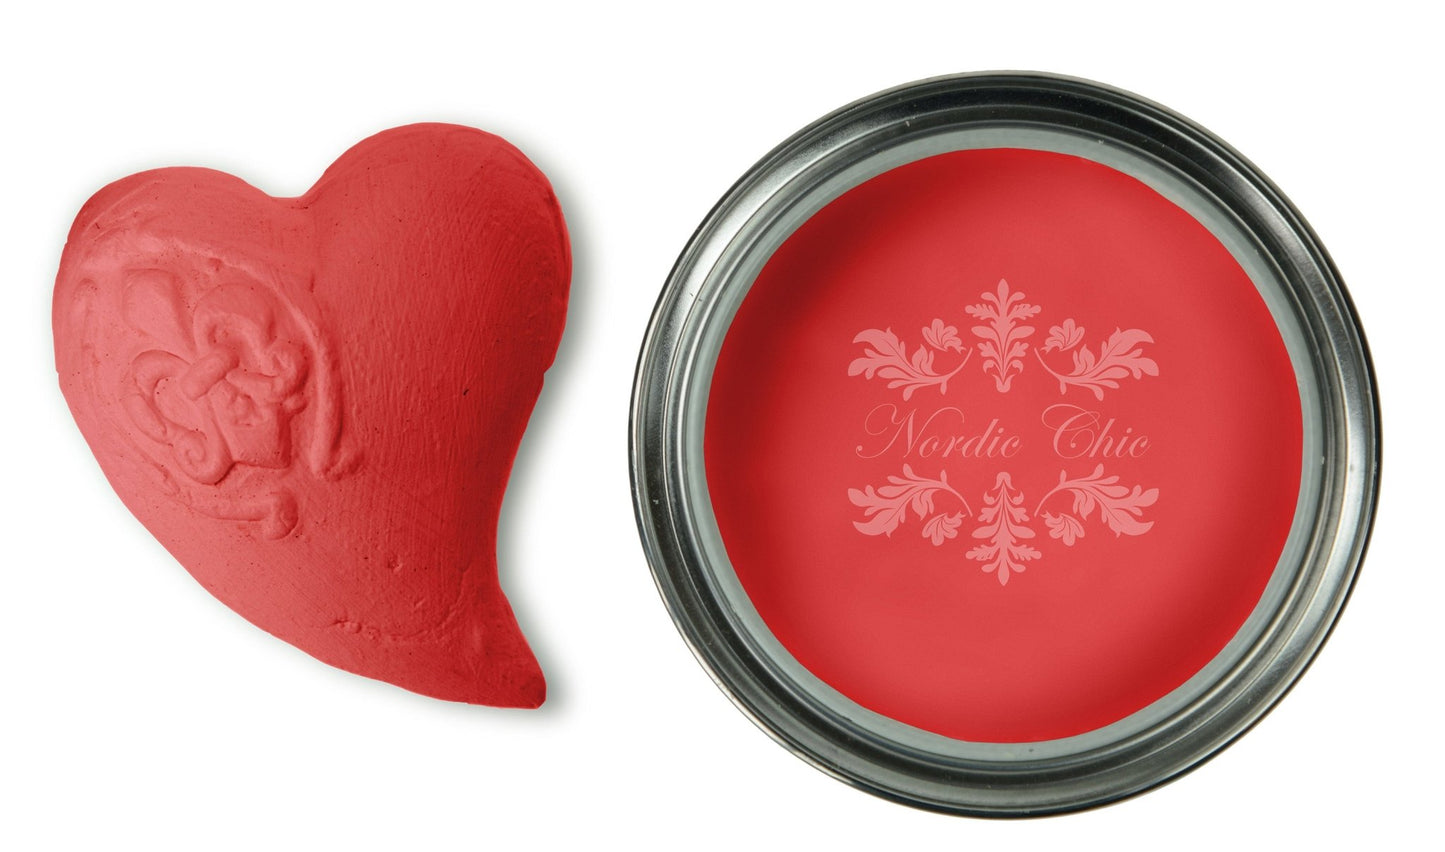 Nordic Chic Furniture Paint - Christmas Red - Nordic Chic®